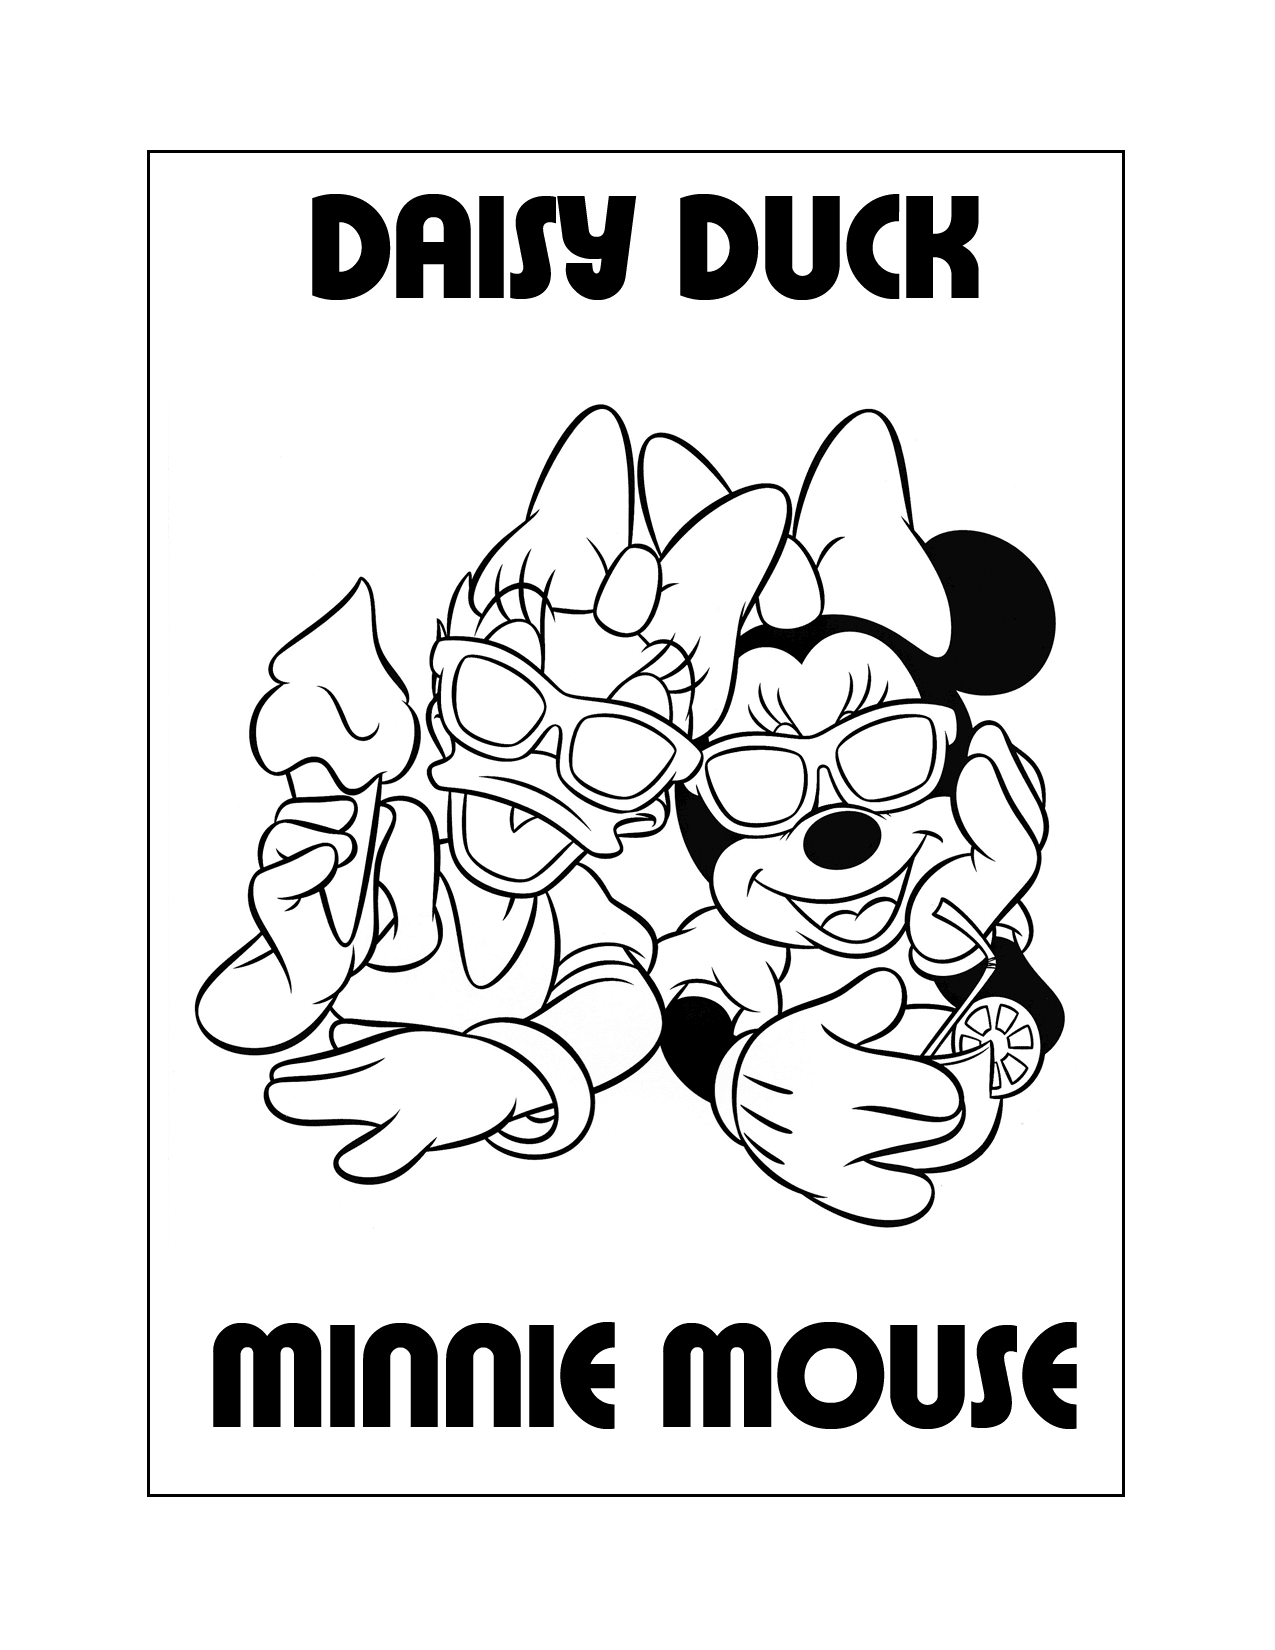 Minnie Mouse And Daisy Duck Coloring Page